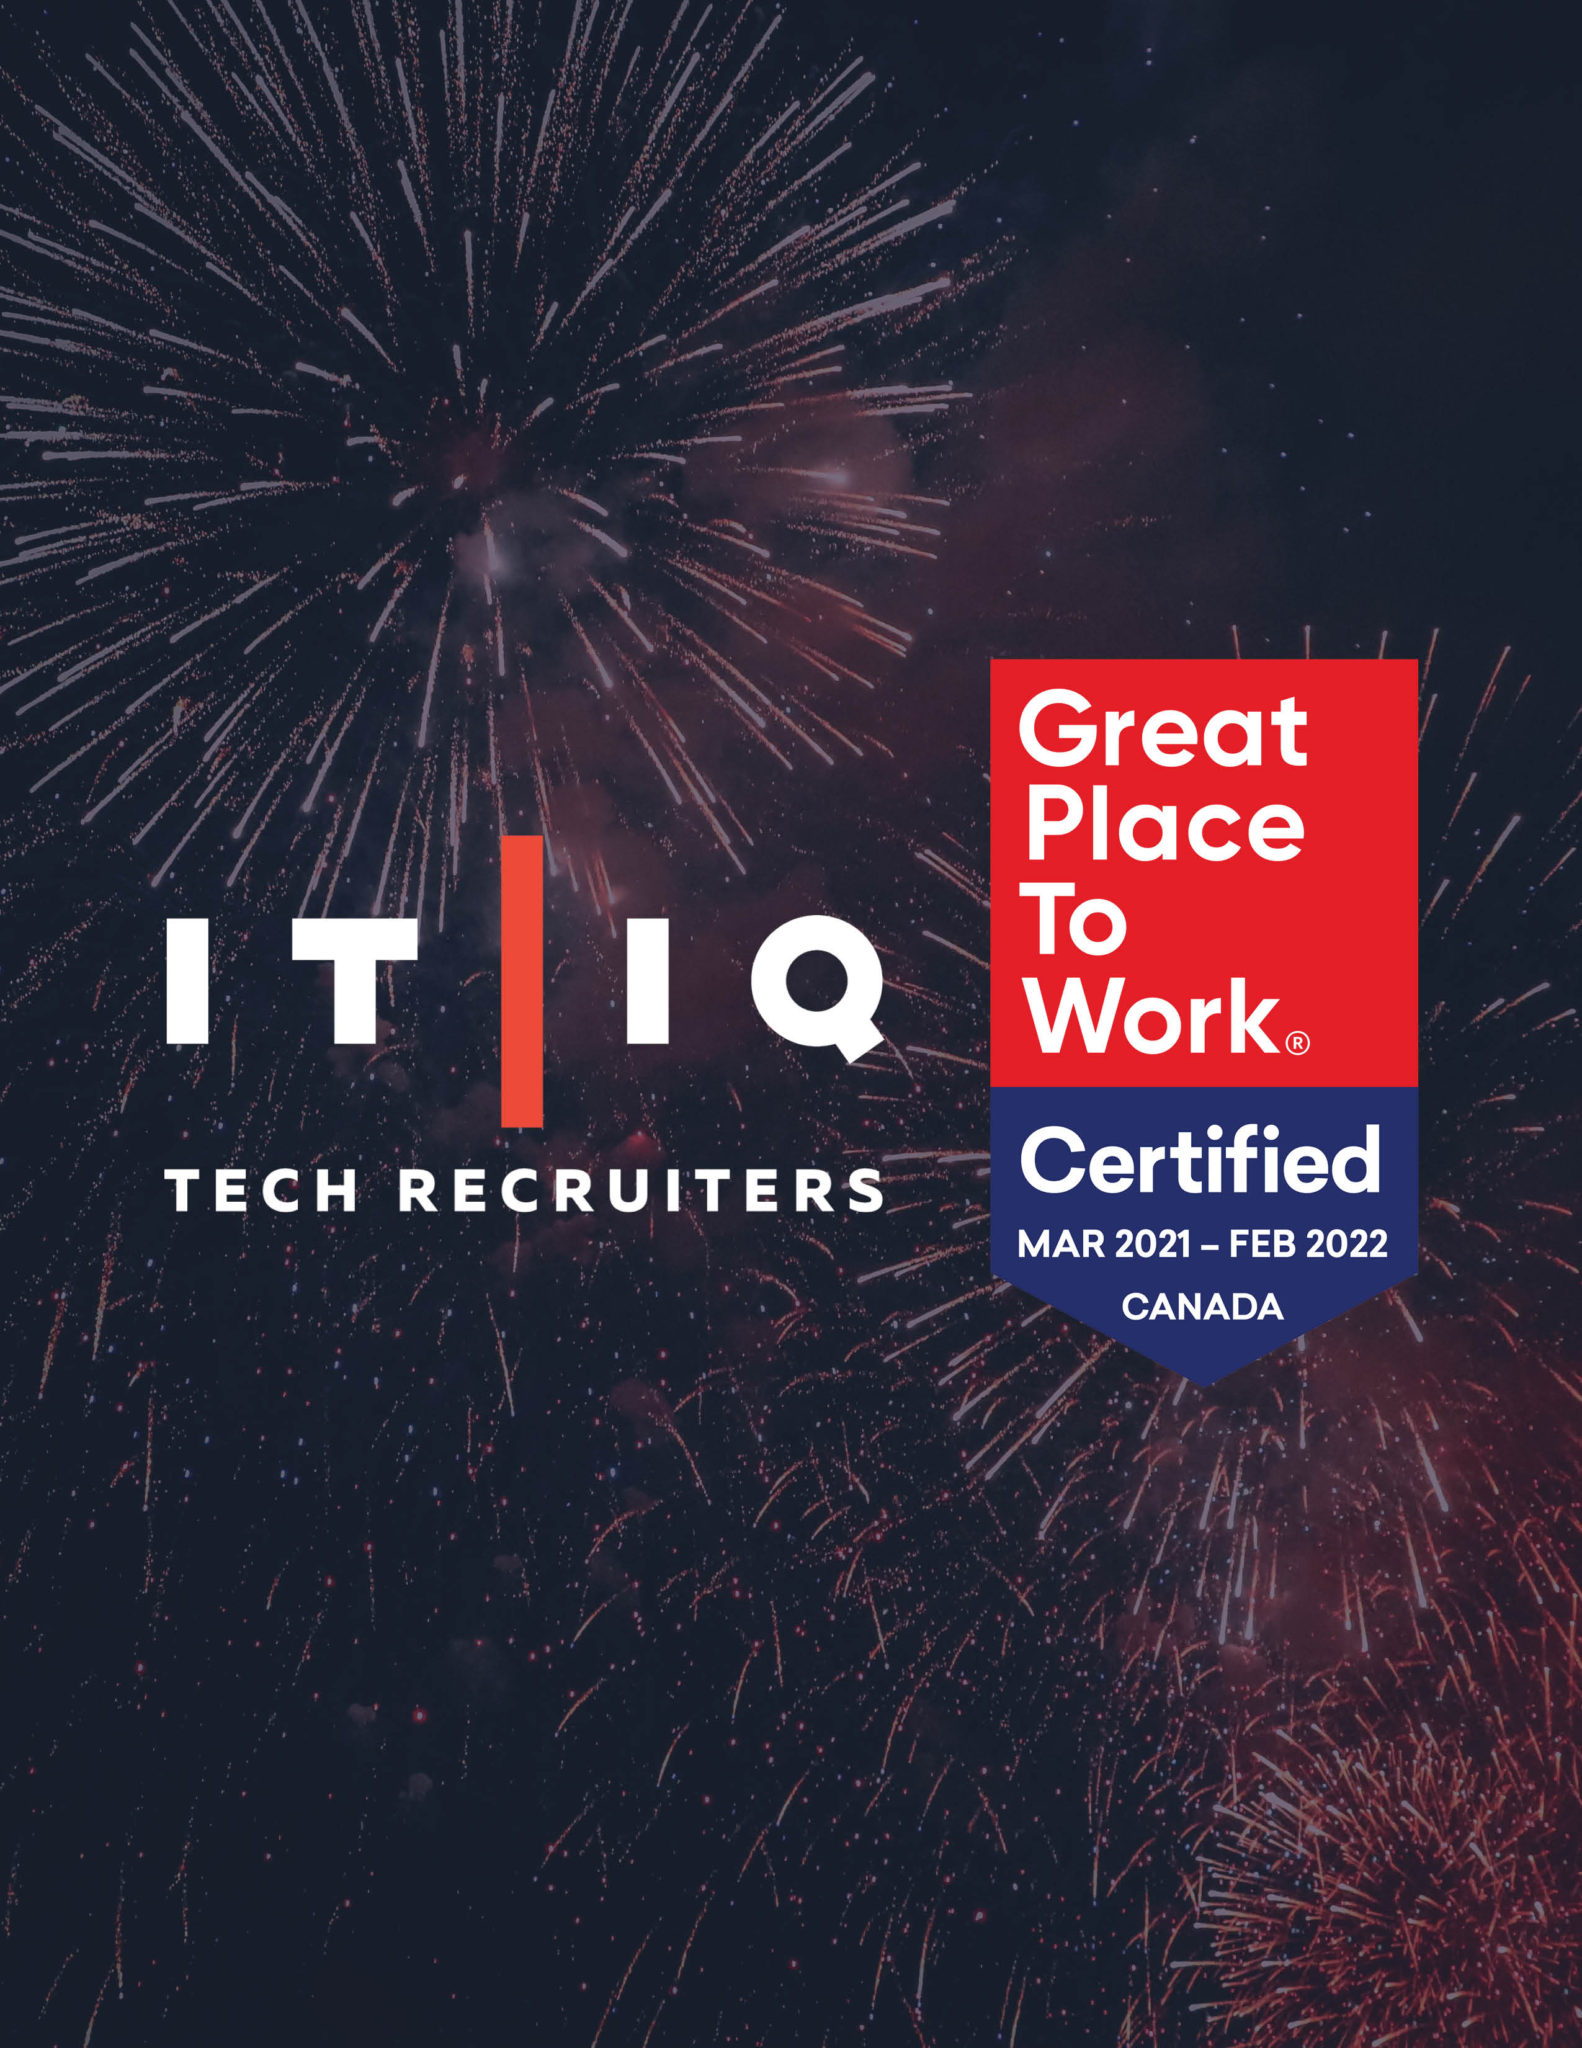 IT/IQ Recruiters certified as a "great place to work" in Canada March 2021 - February 2022